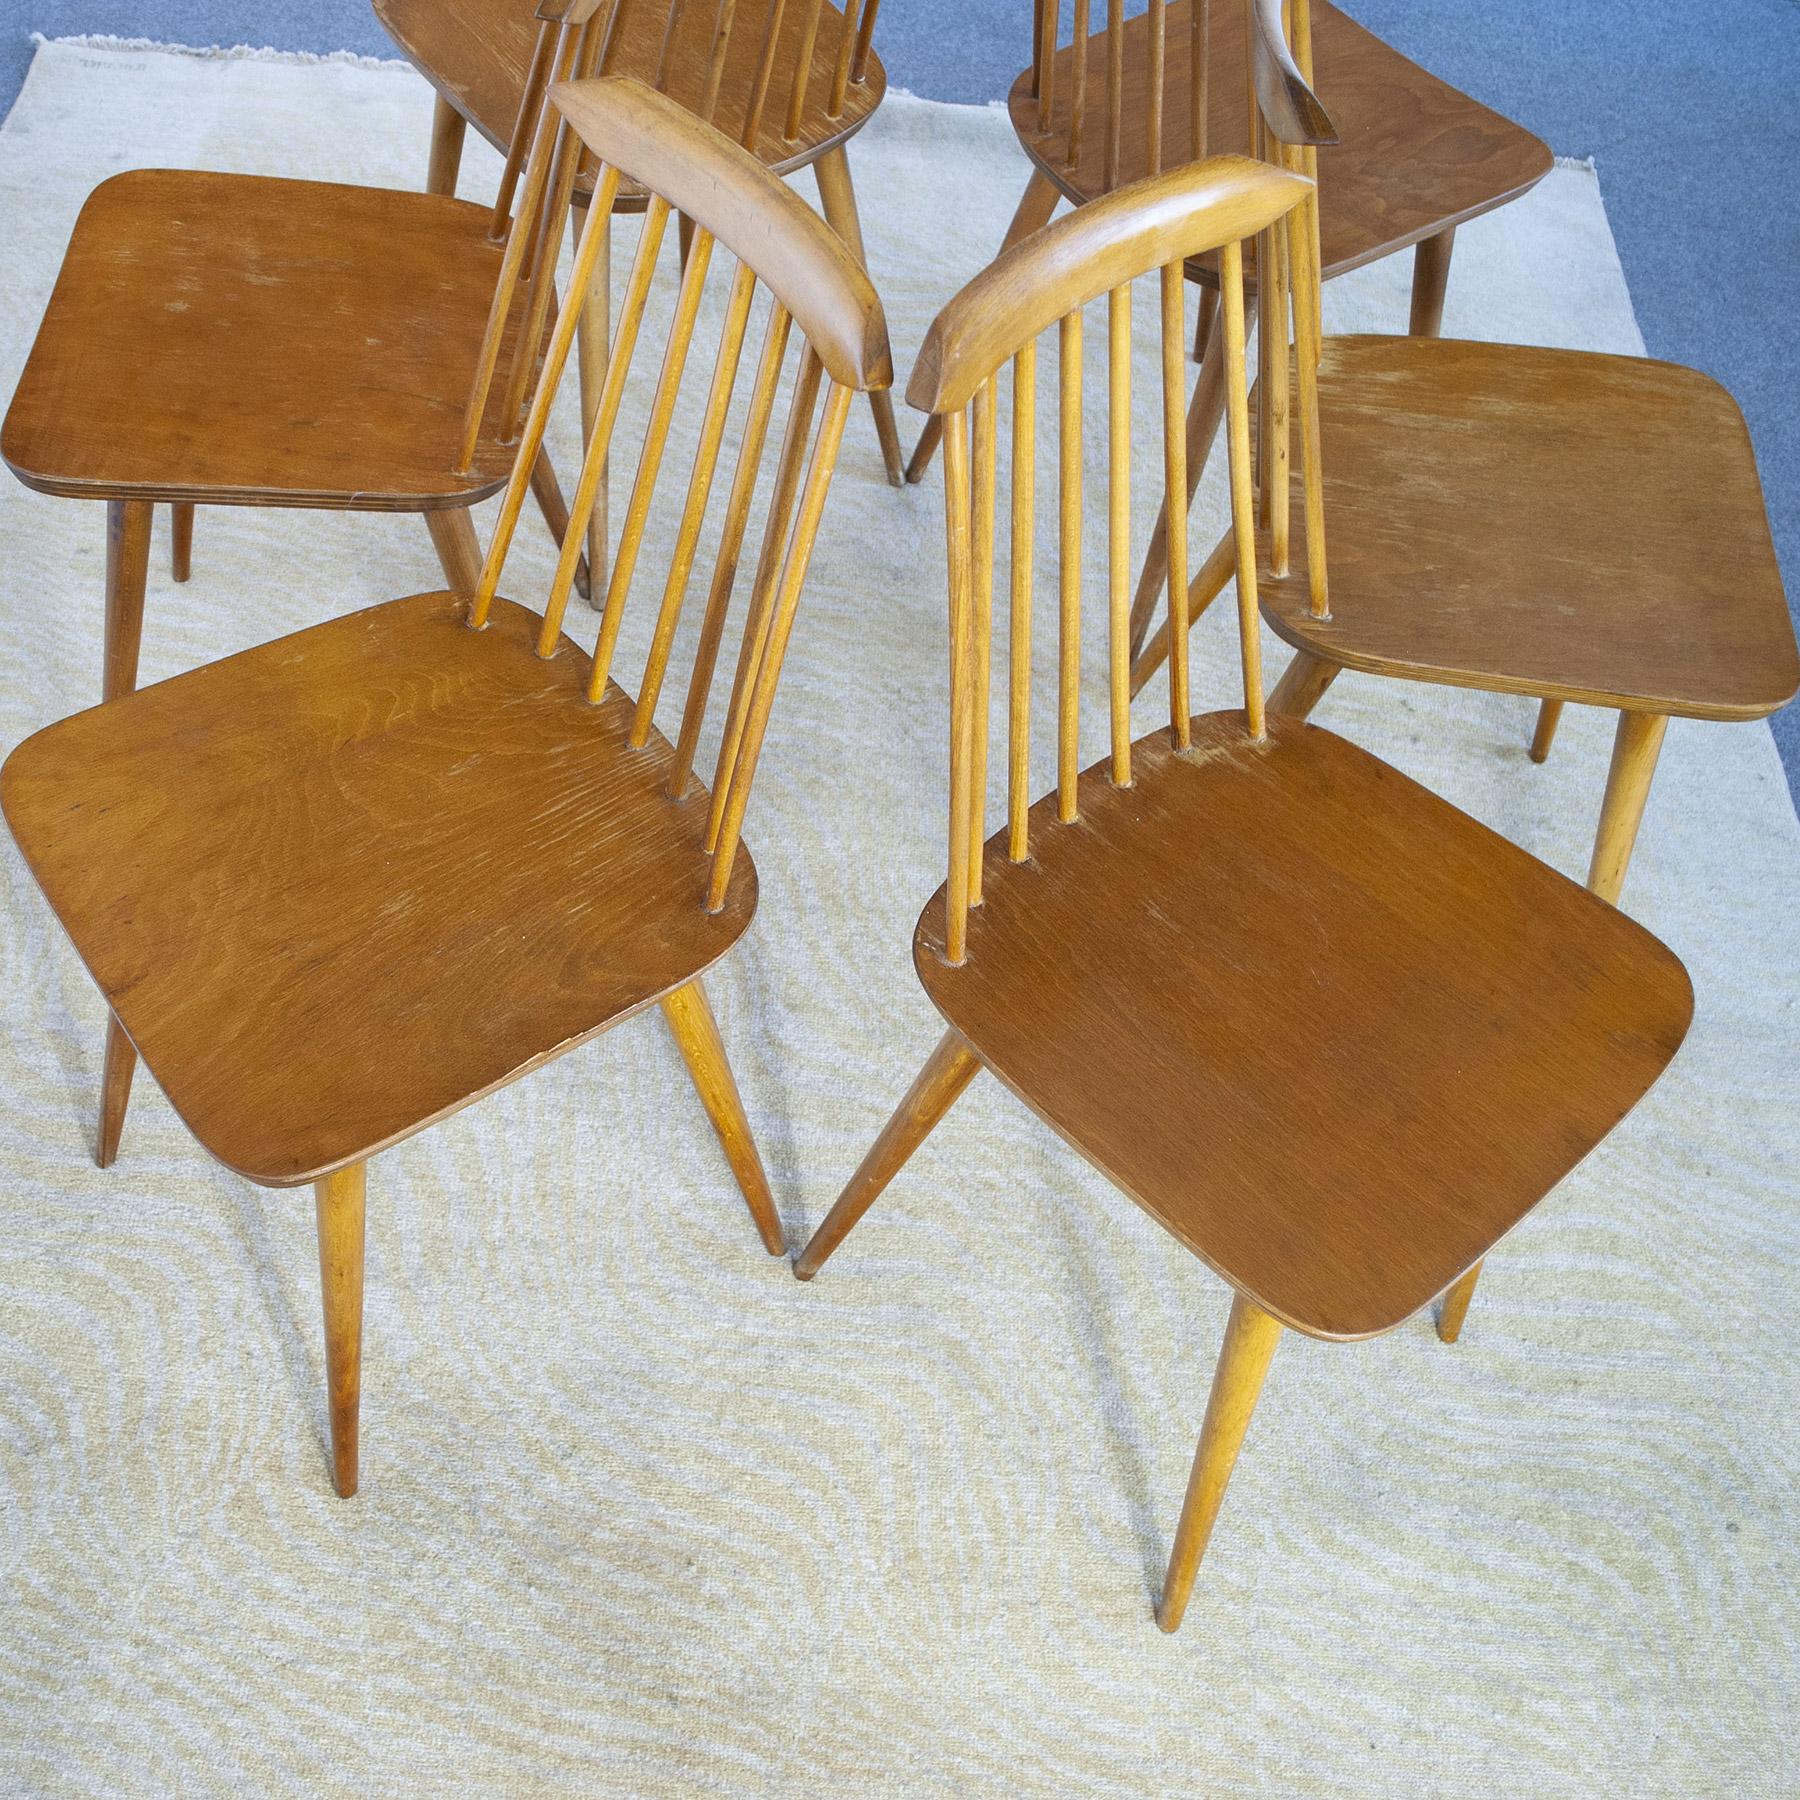 Folke Pålsson Set of Six Chairs in the Style from the Sixties For Sale 2